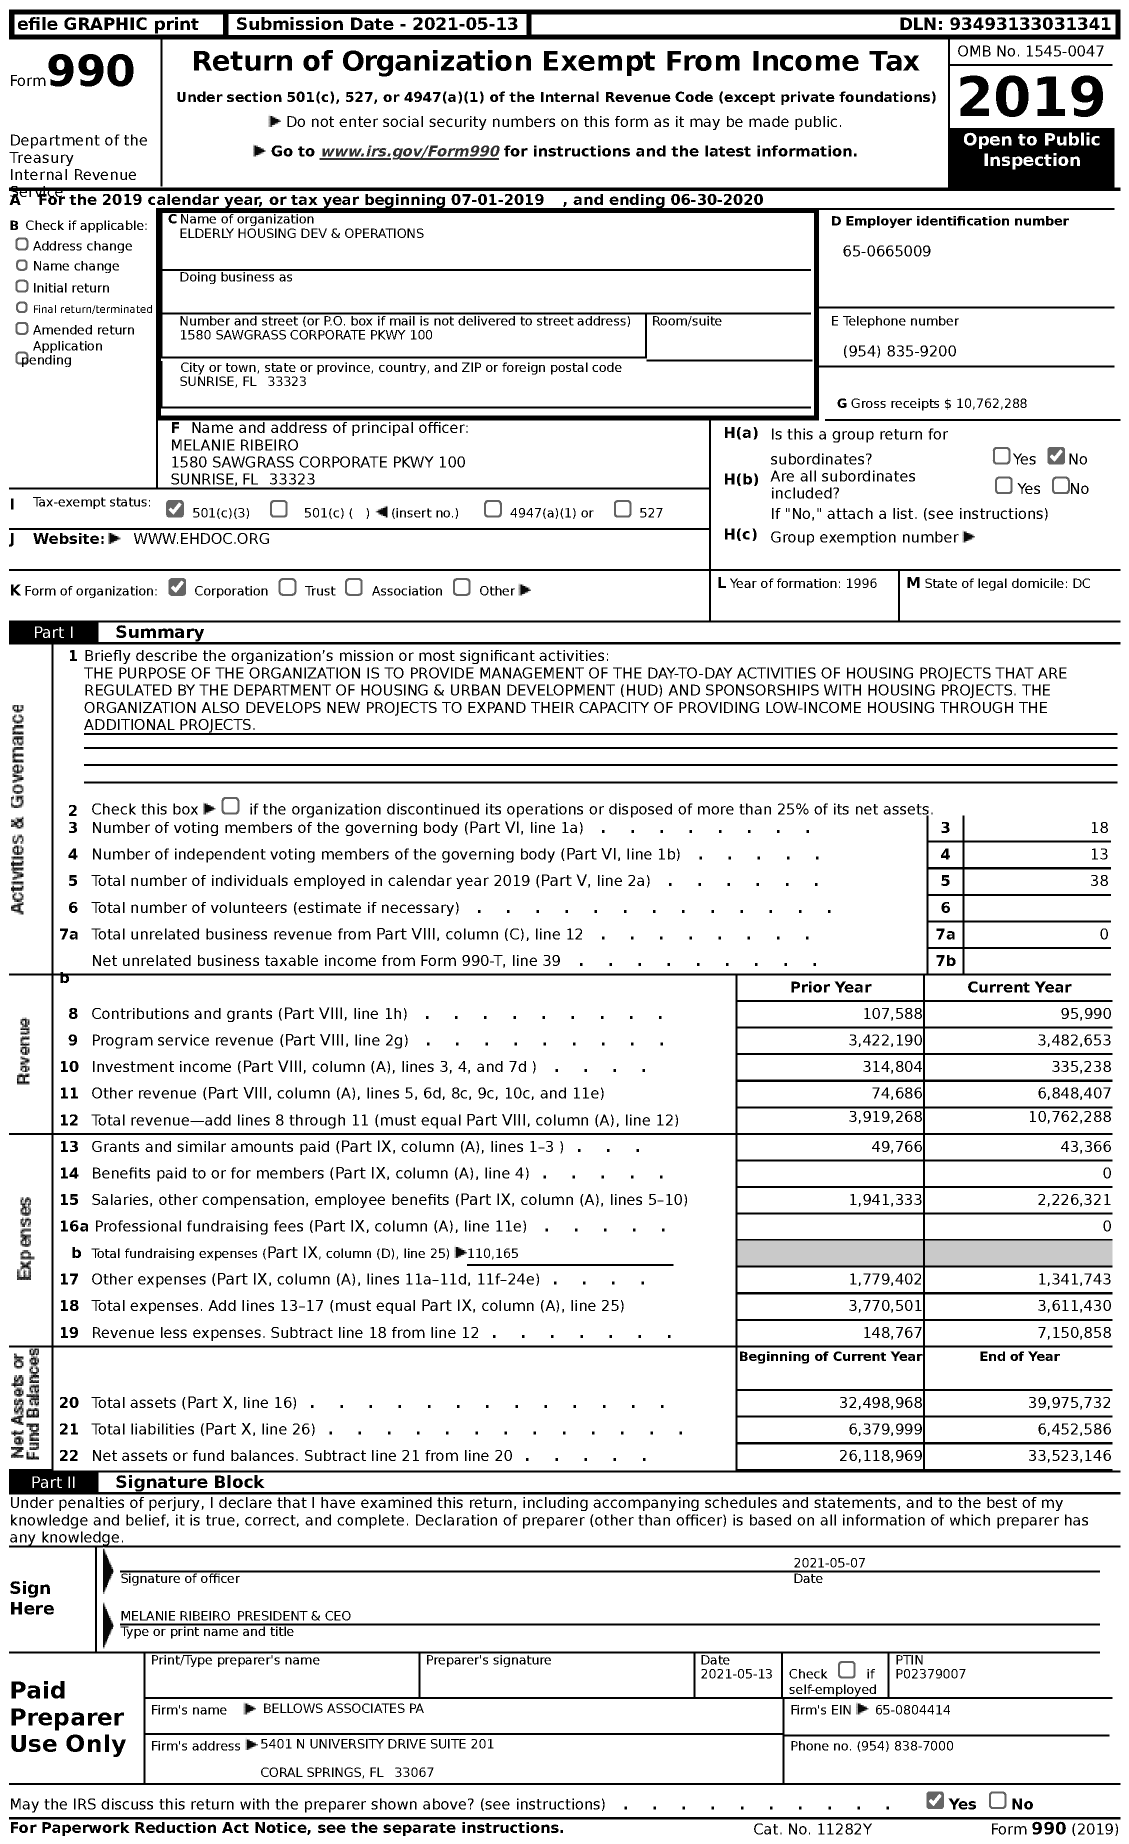 Image of first page of 2019 Form 990 for Elderly Housing Development and Operations Corporation (EHDOC)